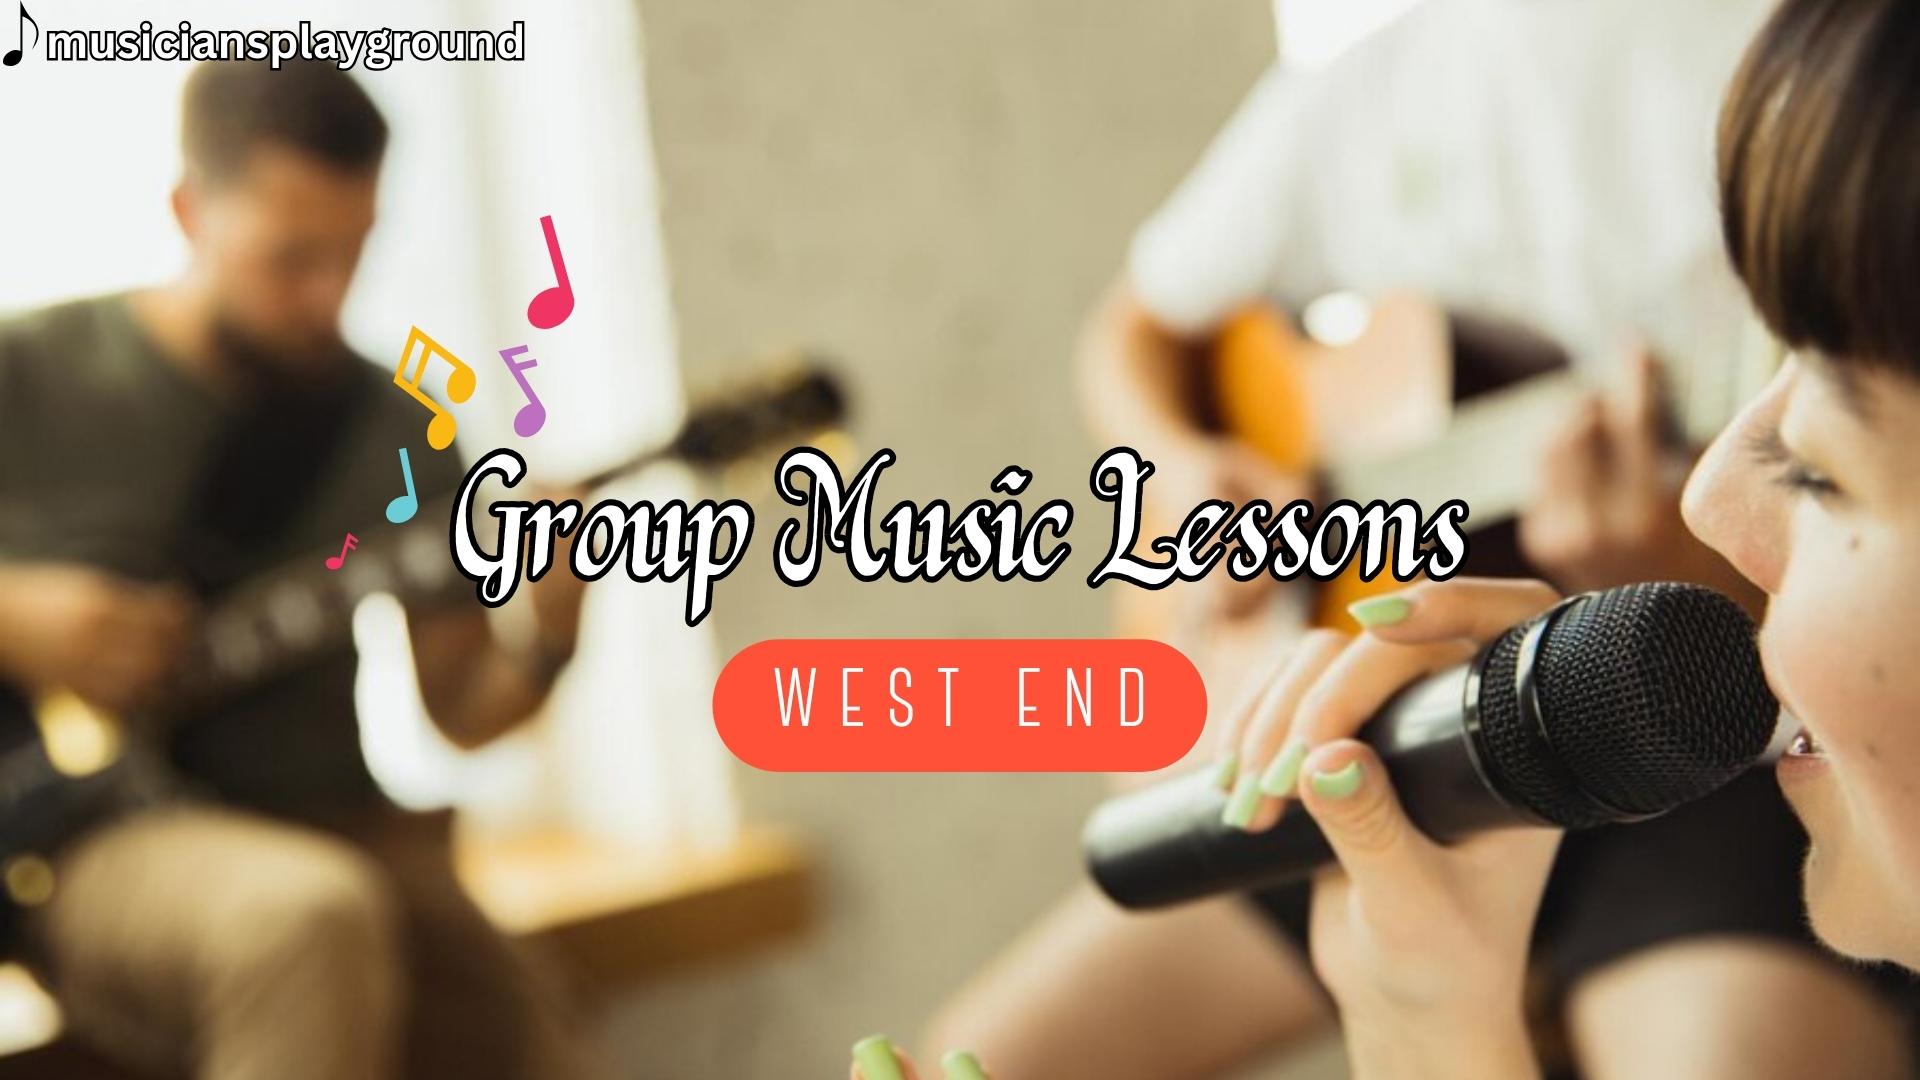 Group Music Lessons in West End, Massachusetts: Enhancing Musical Skills at Musicians Playground